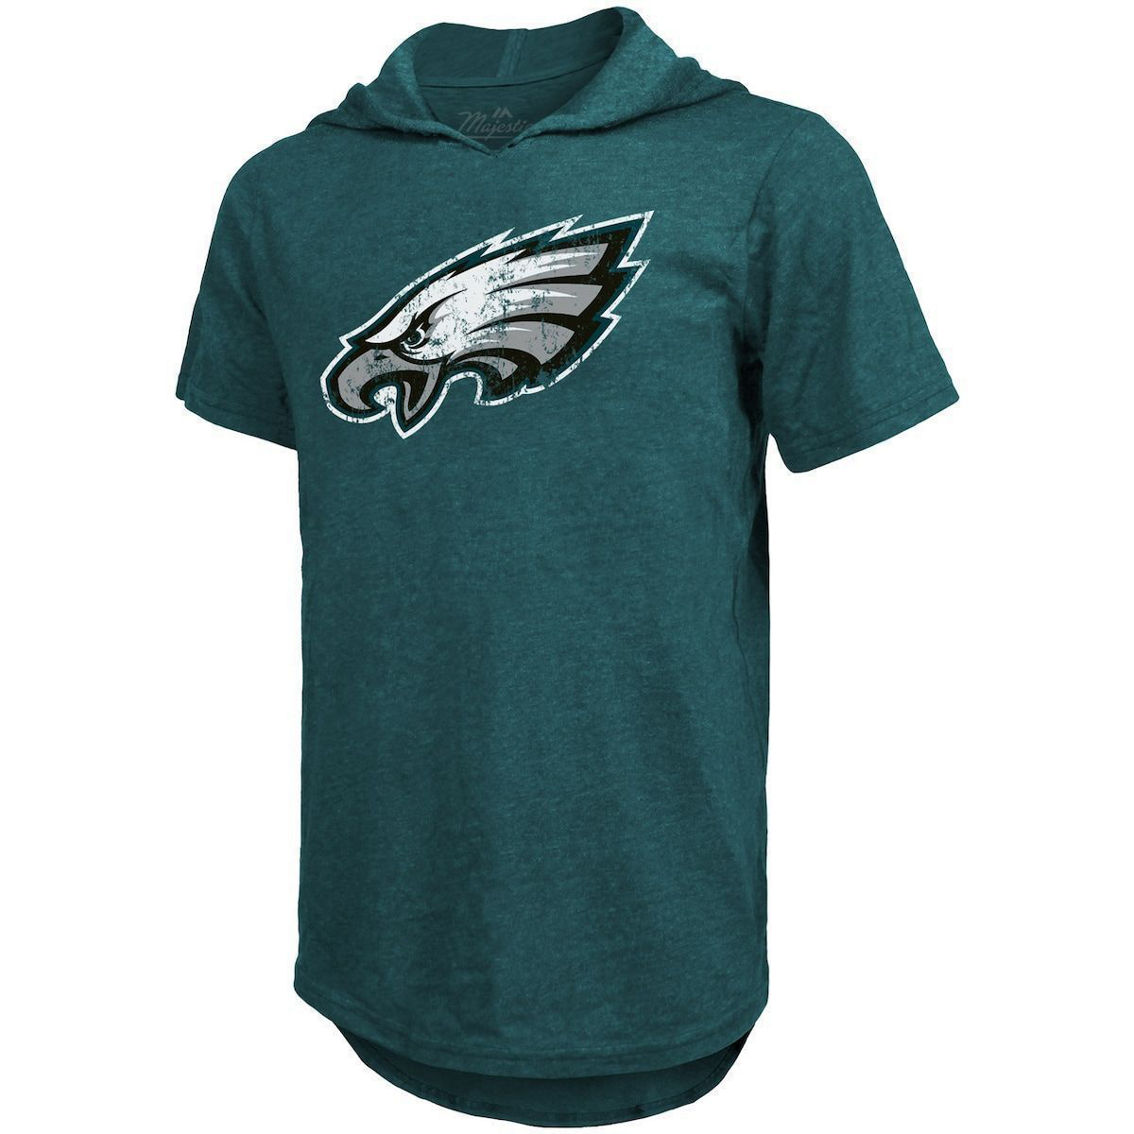 Majestic Threads Men's Threads Jalen Hurts Midnight Green Philadelphia Eagles Player Name & Number Tri-Blend Slim Fit Hoodie T-Shirt - Image 3 of 4